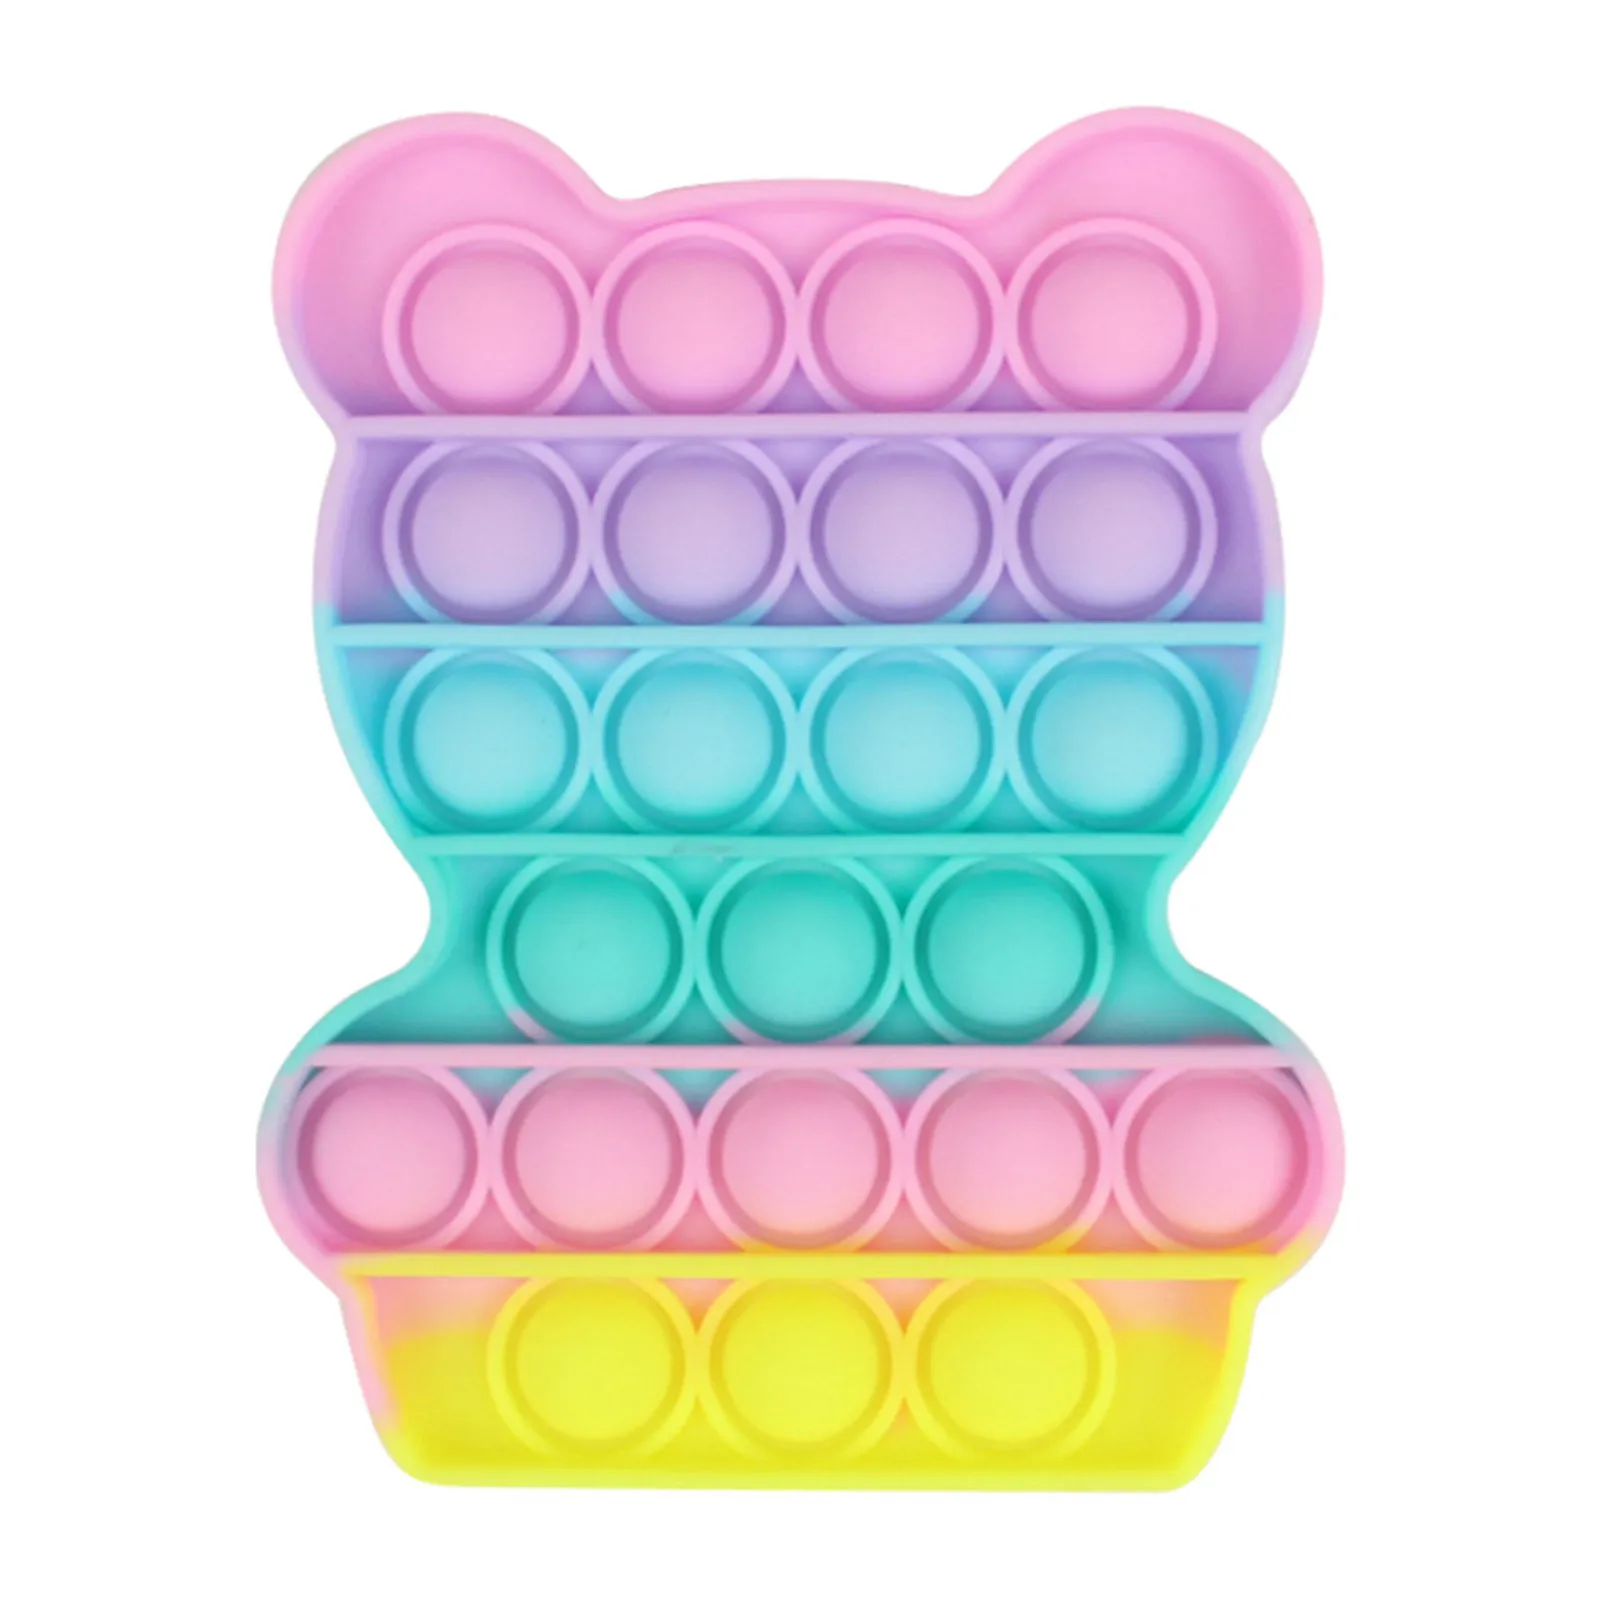 mochi's fidget toys Squishy Fidget Toys Push Toy Square Antistress New Push Bubble Rainbow Popits For Hands Popins Pops Reliver Stress For Adults squeezy toys